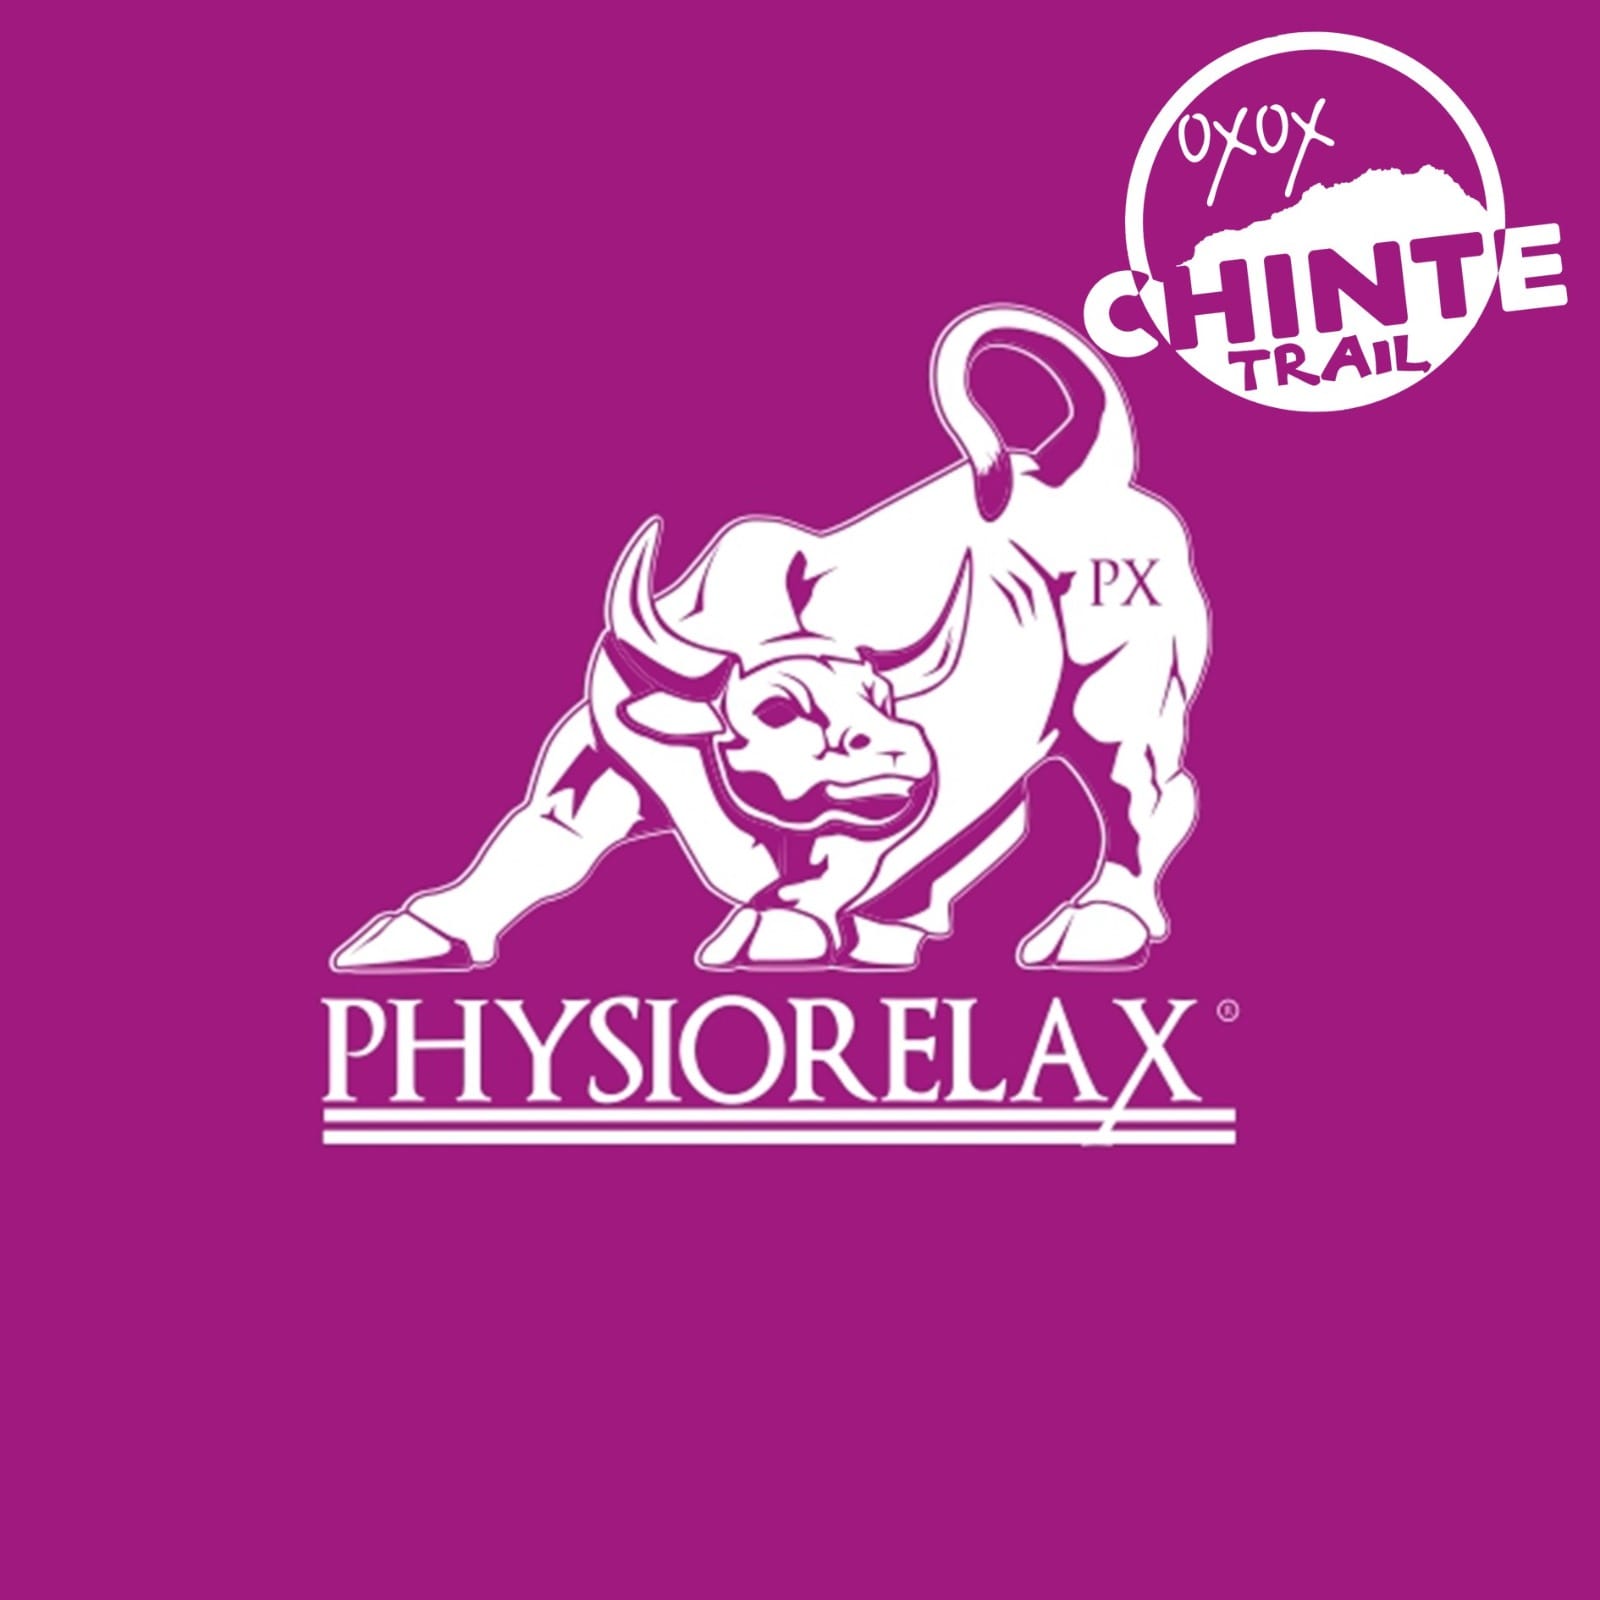 Physiorelax se une a Chinte Trail